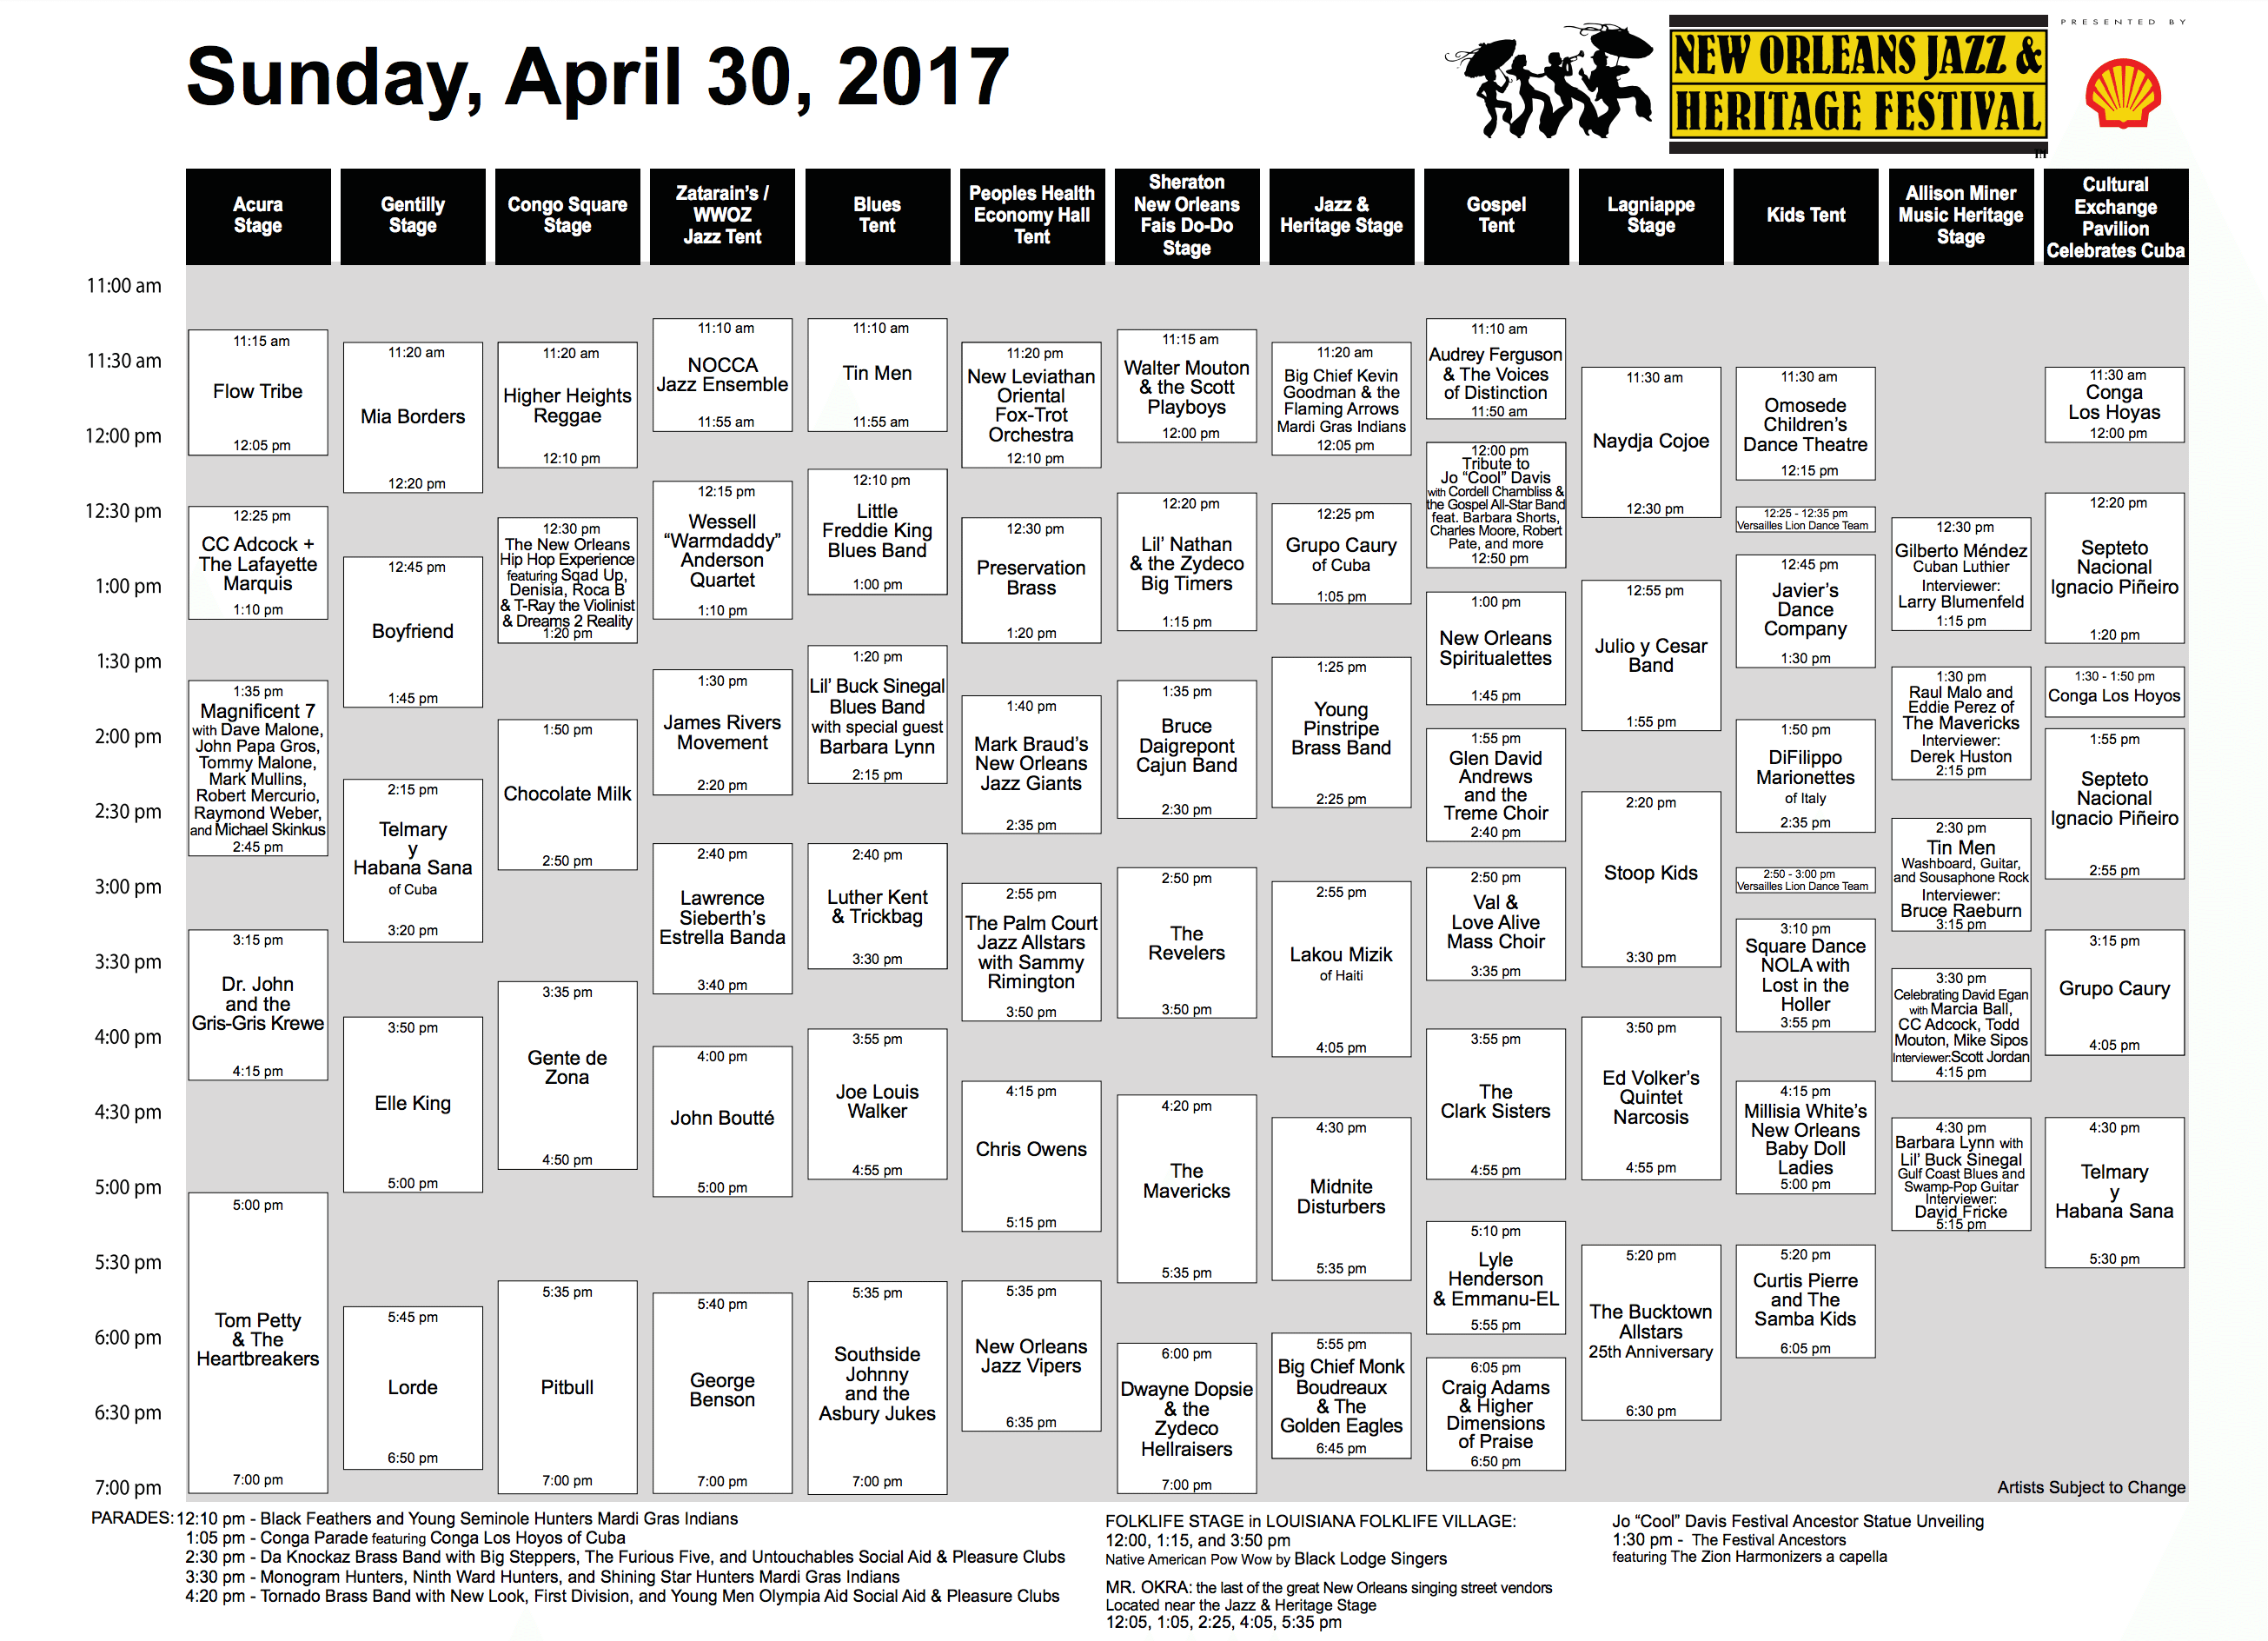 Full 2017 Jazz Fest Schedule Announced With Newly Released Jazz Fest Cubes